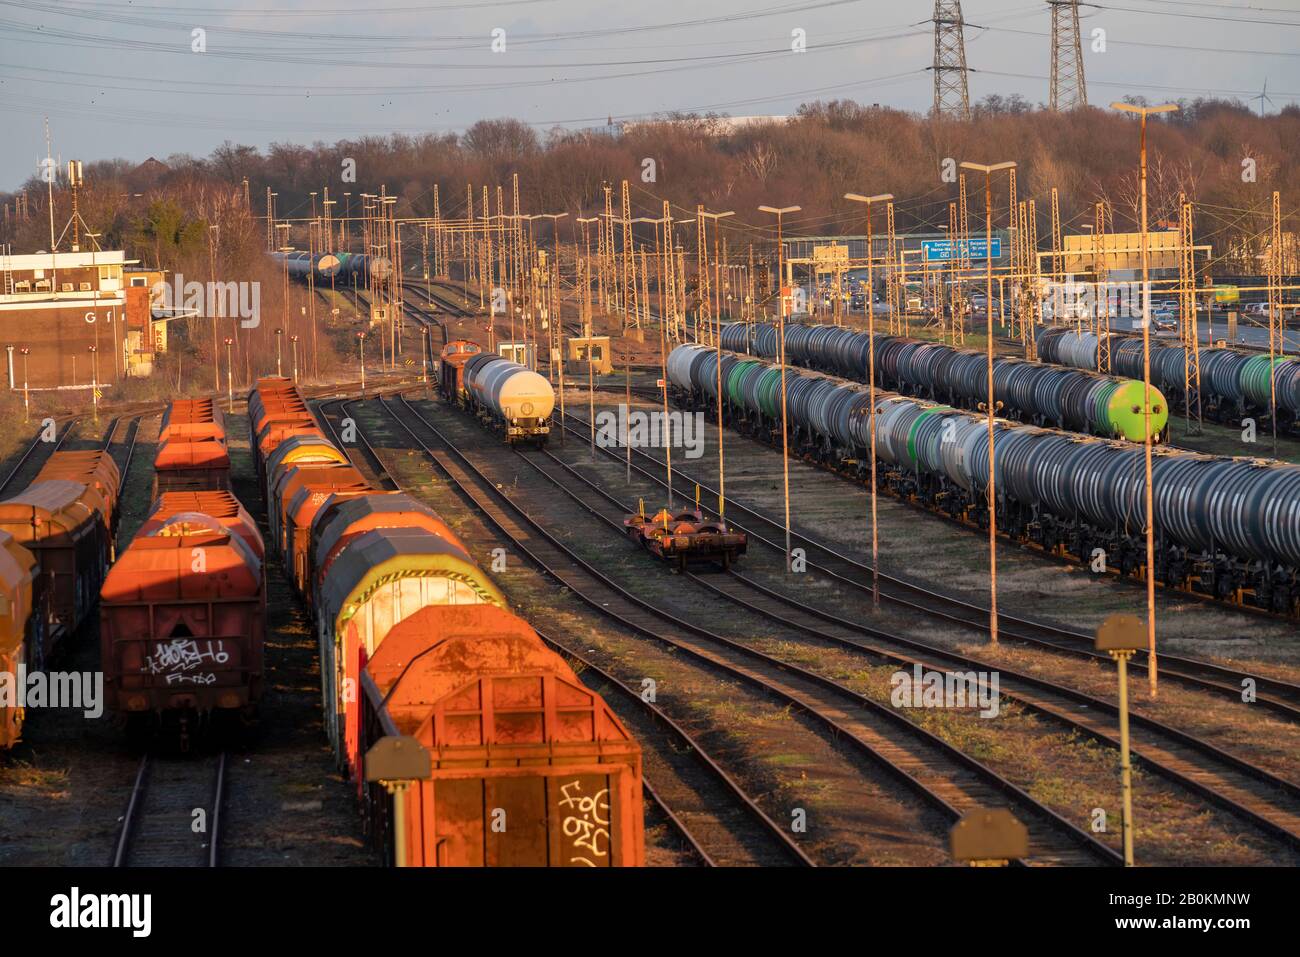 Gelsenkirchen Bismarck marshalling yard, freight trains are assembled and moved here, Germany Stock Photo